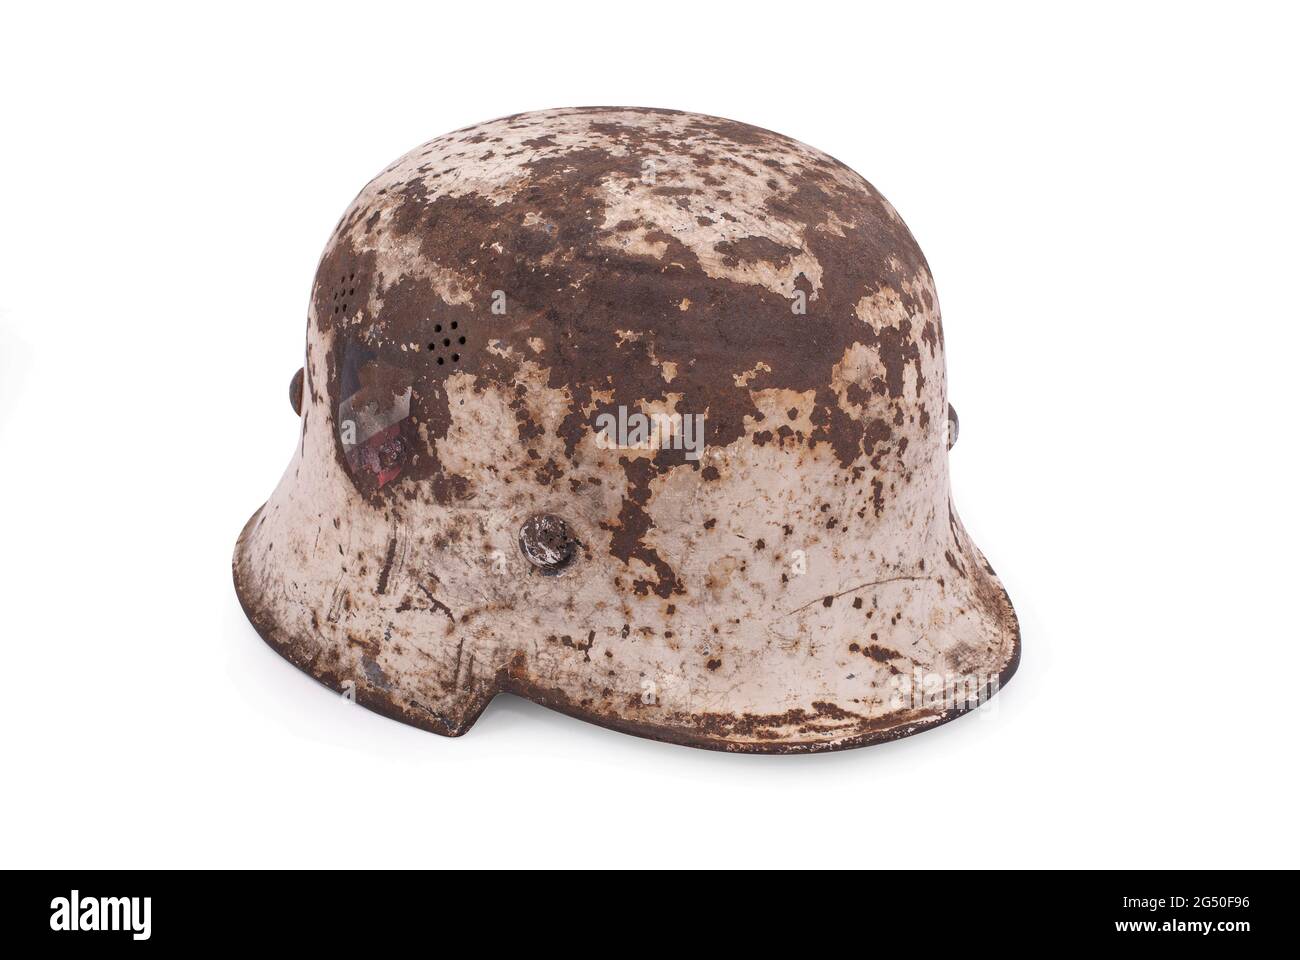 Germany at the World War II. German army helmet (model M35) with winter camouflage and decals on isolated background. Stock Photo